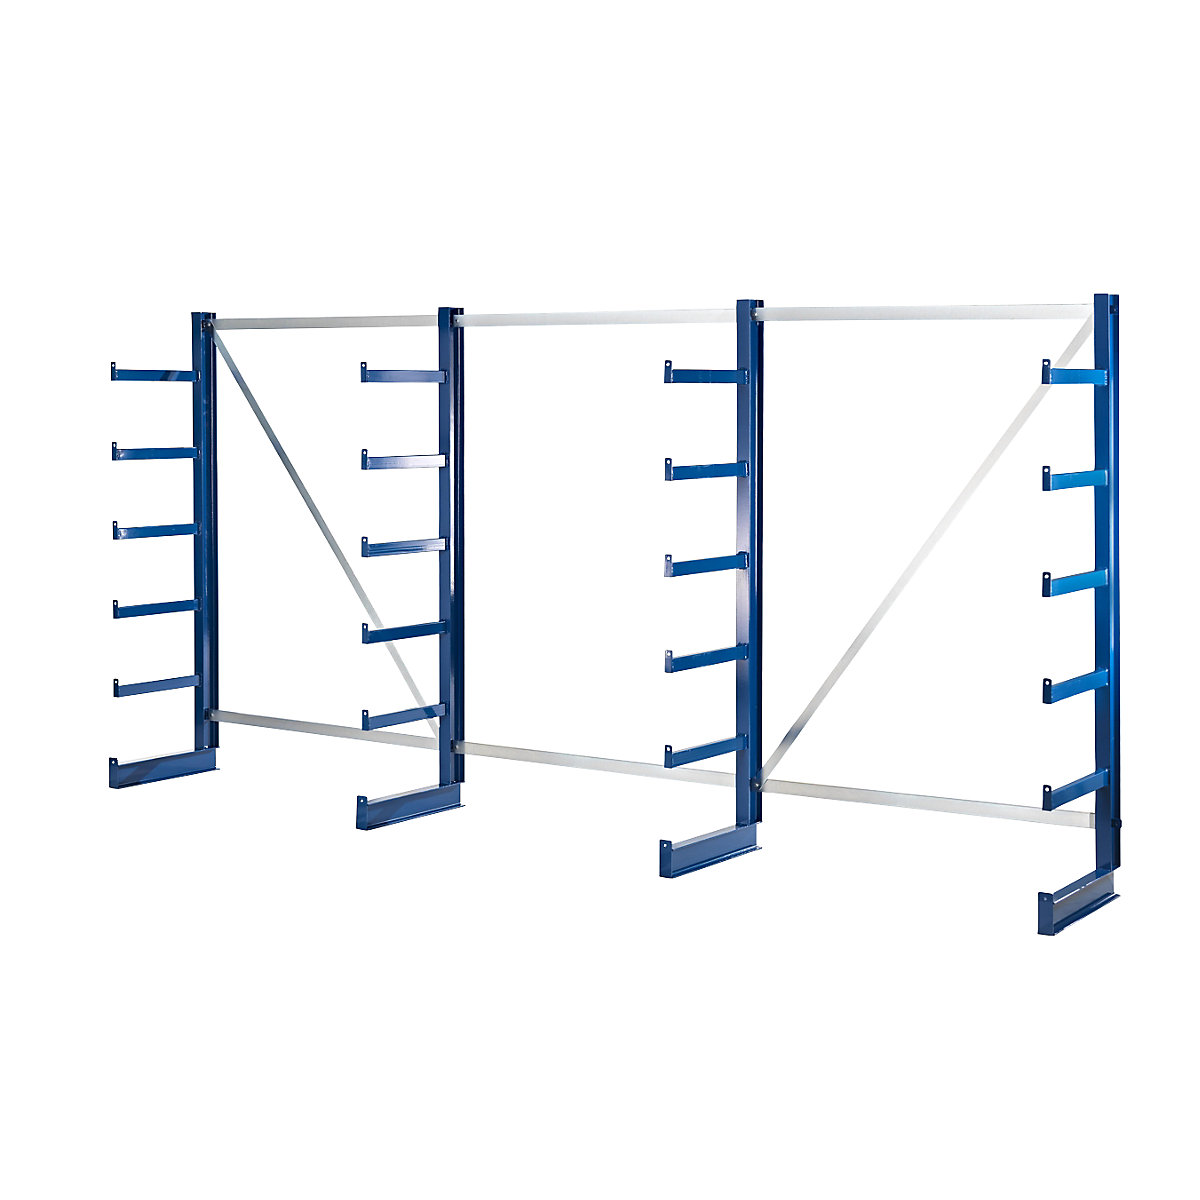 Cantilever racking unit with identical cantilever arm length – eurokraft pro